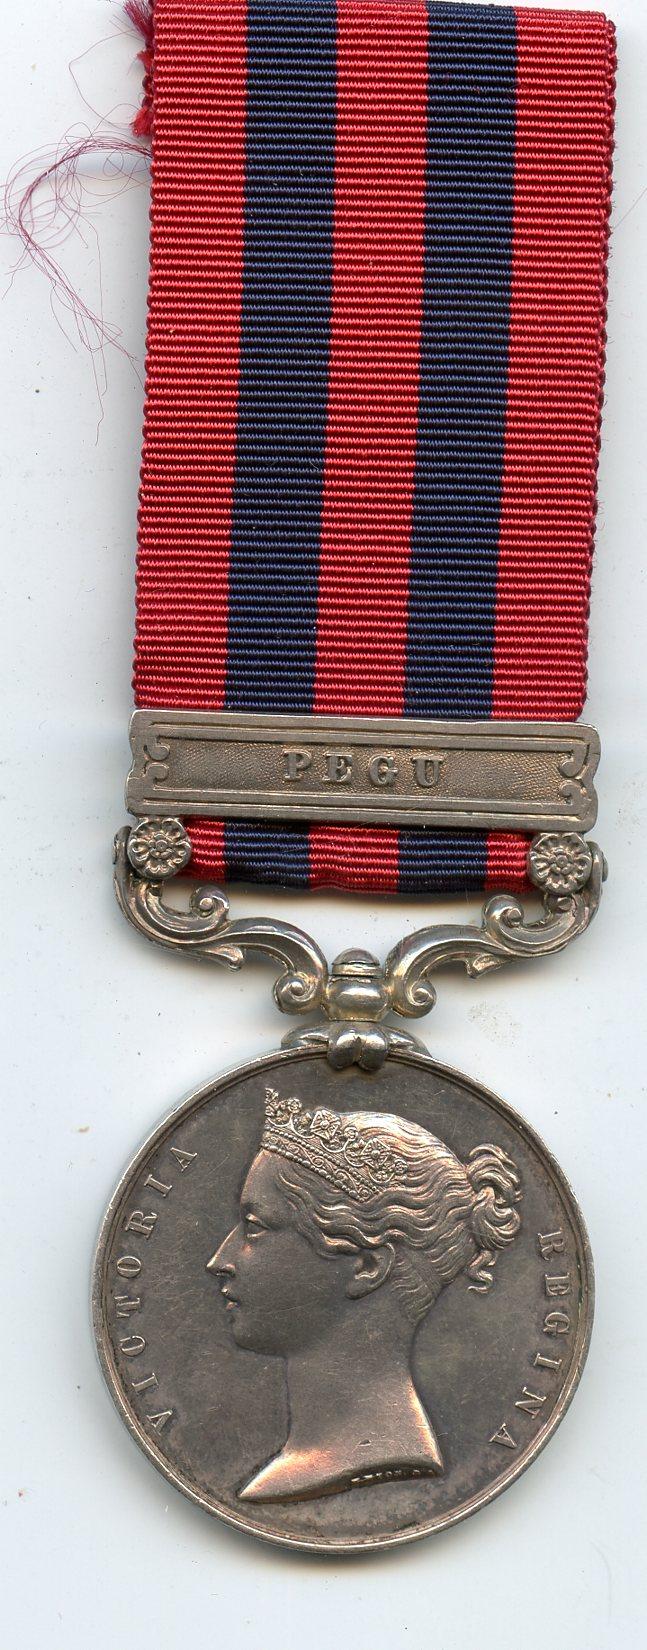 India General Service Medal 1854-95 Clasp Pegu  WM HALL. 51ST FOOT.  (  King's Own Yorkshire Light Infantry )